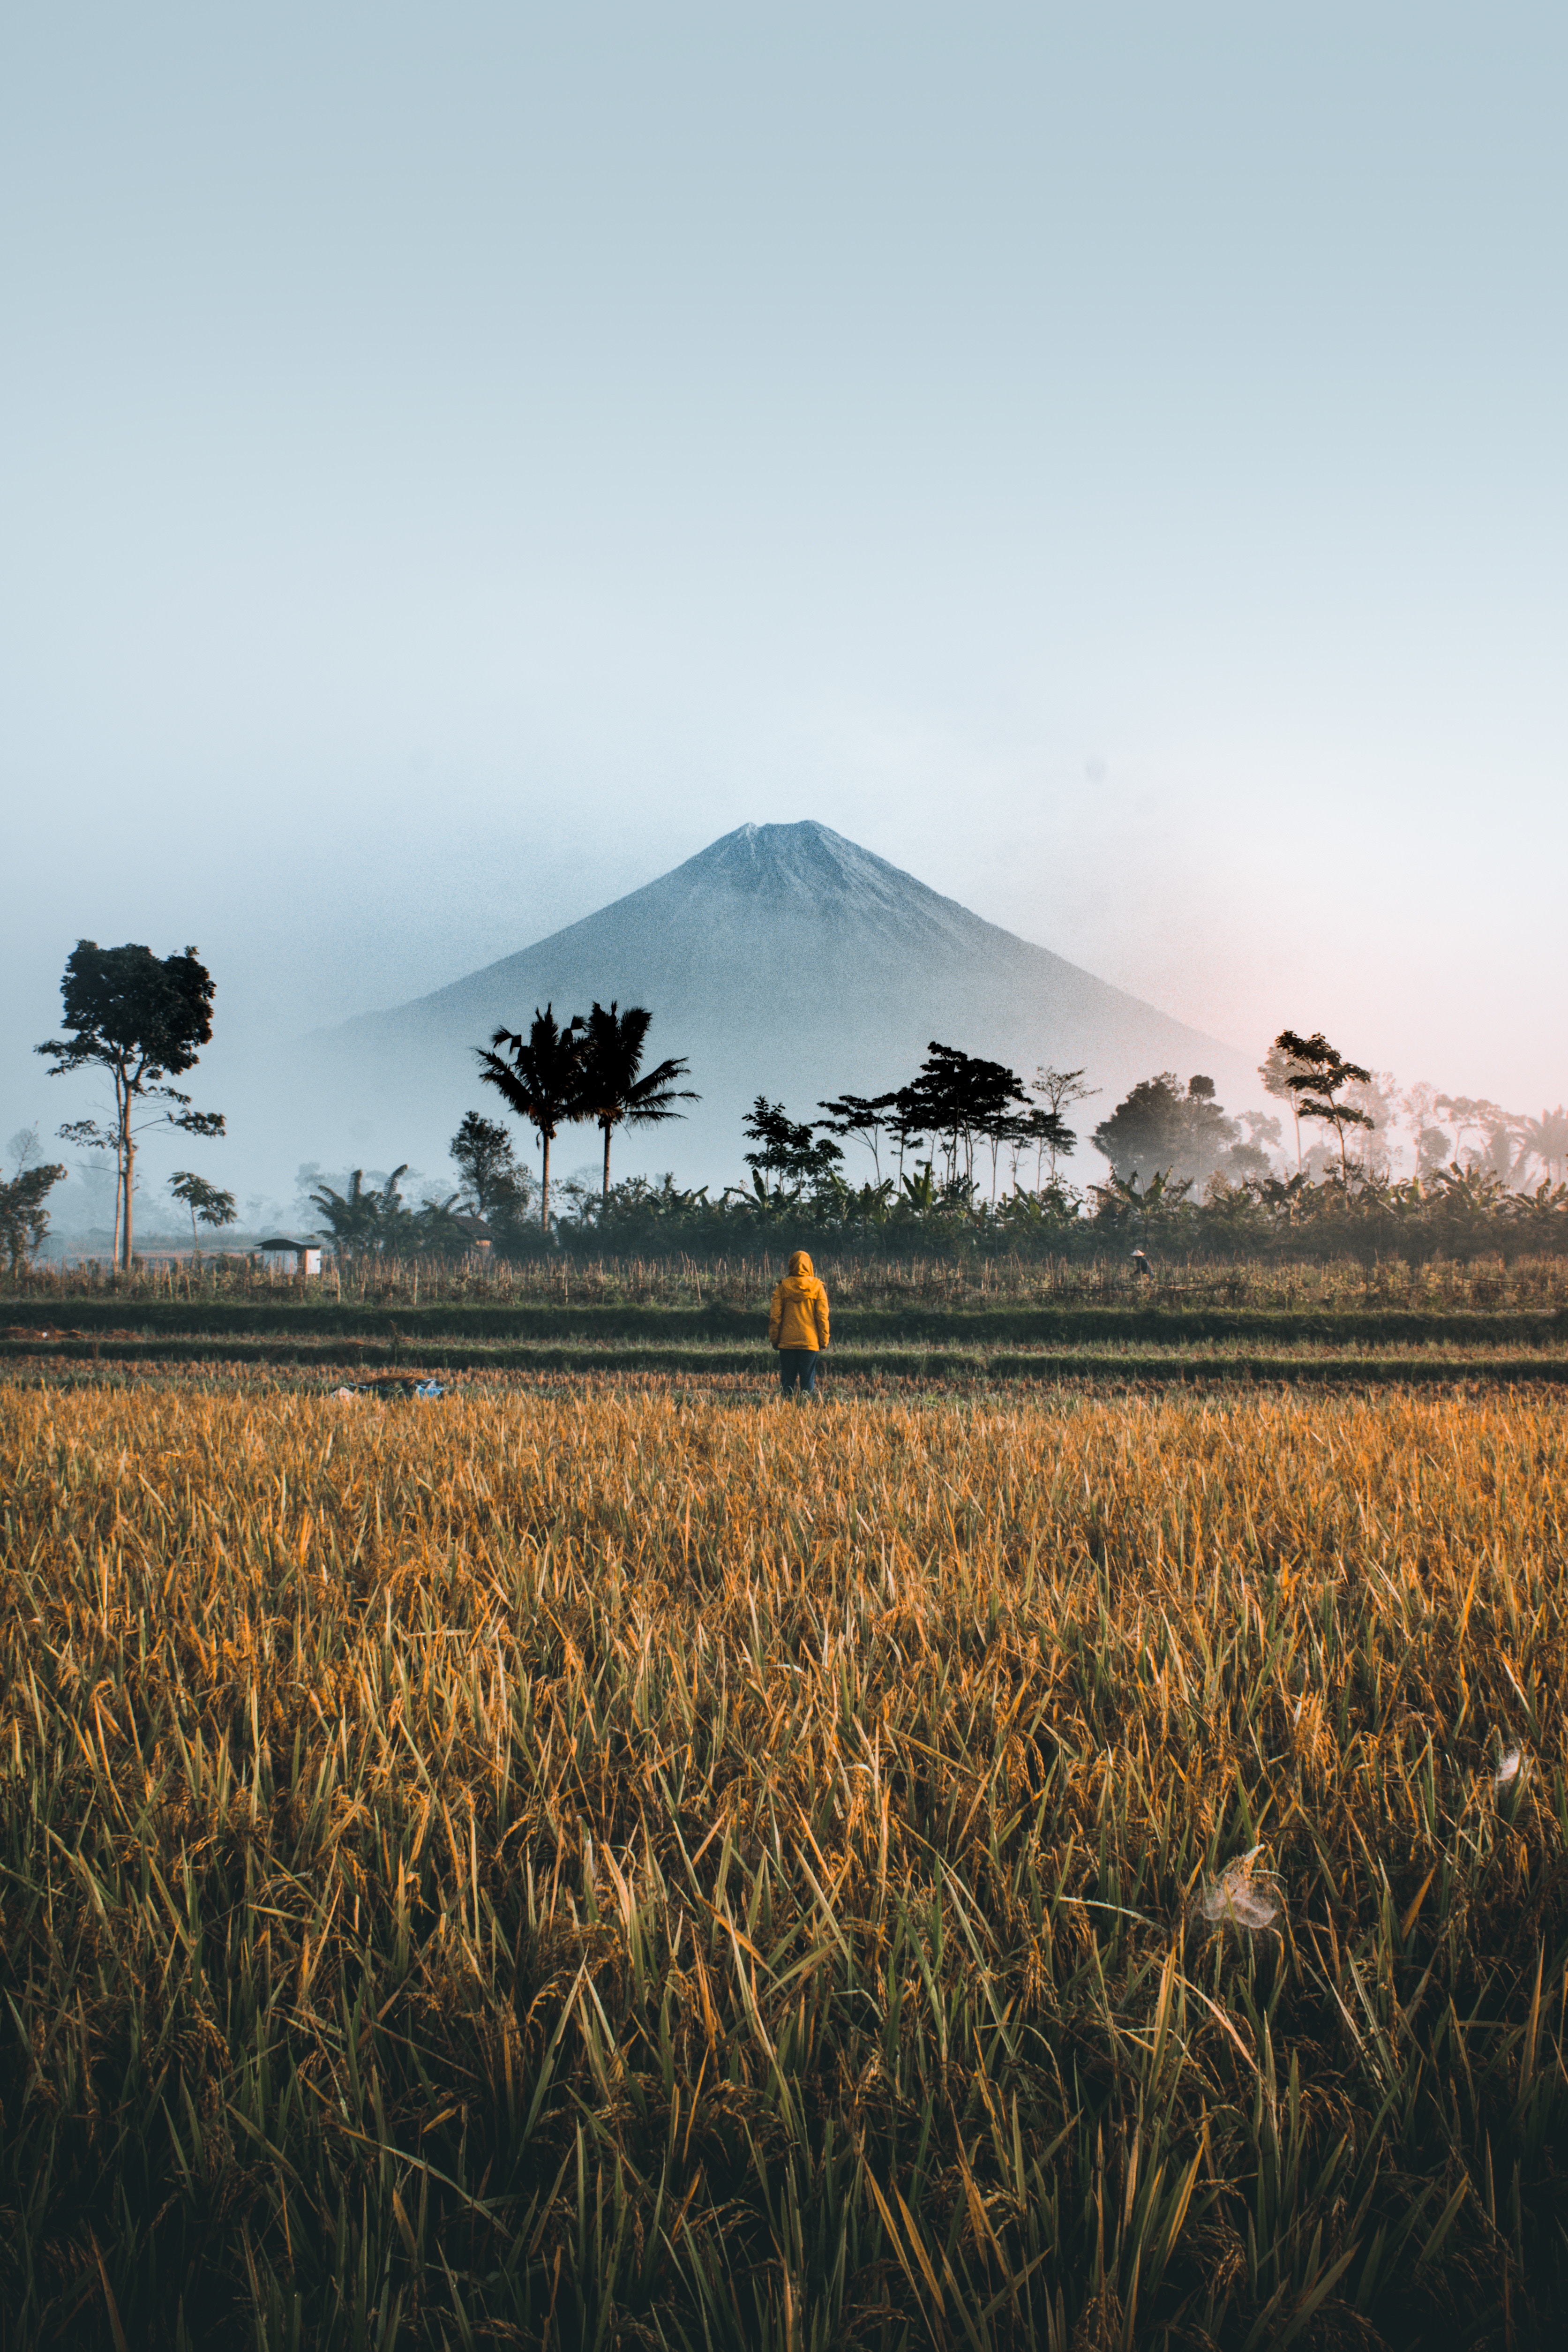 palms, indonesia, nature, mountain, privacy, seclusion, field, loneliness